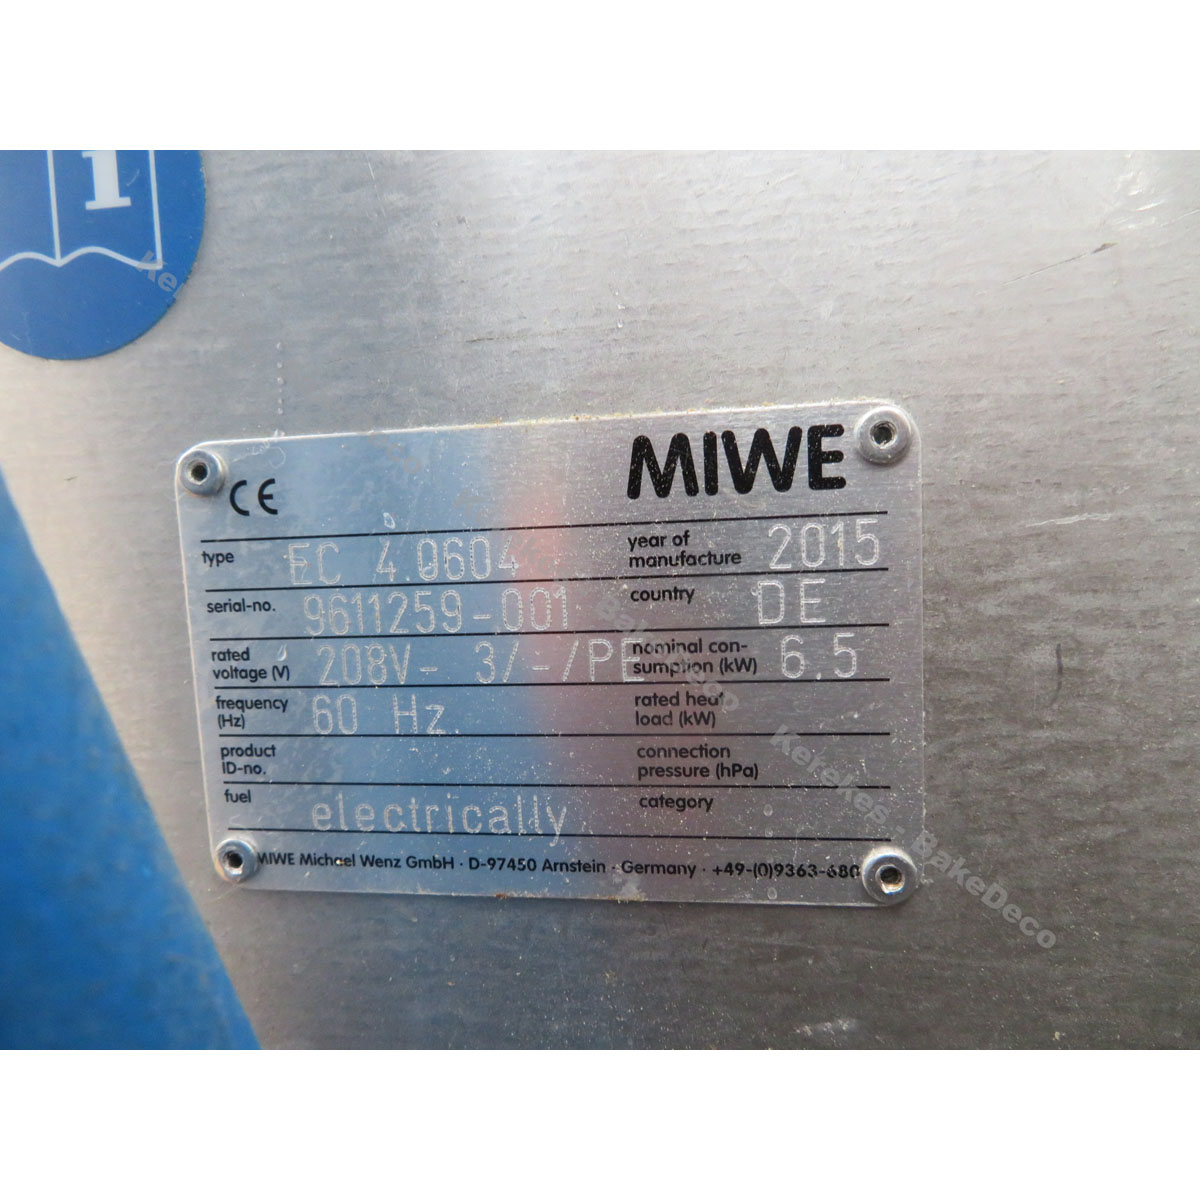 Miwe EC 4.0604 Electric Convection Oven, Used Great Condition image 4